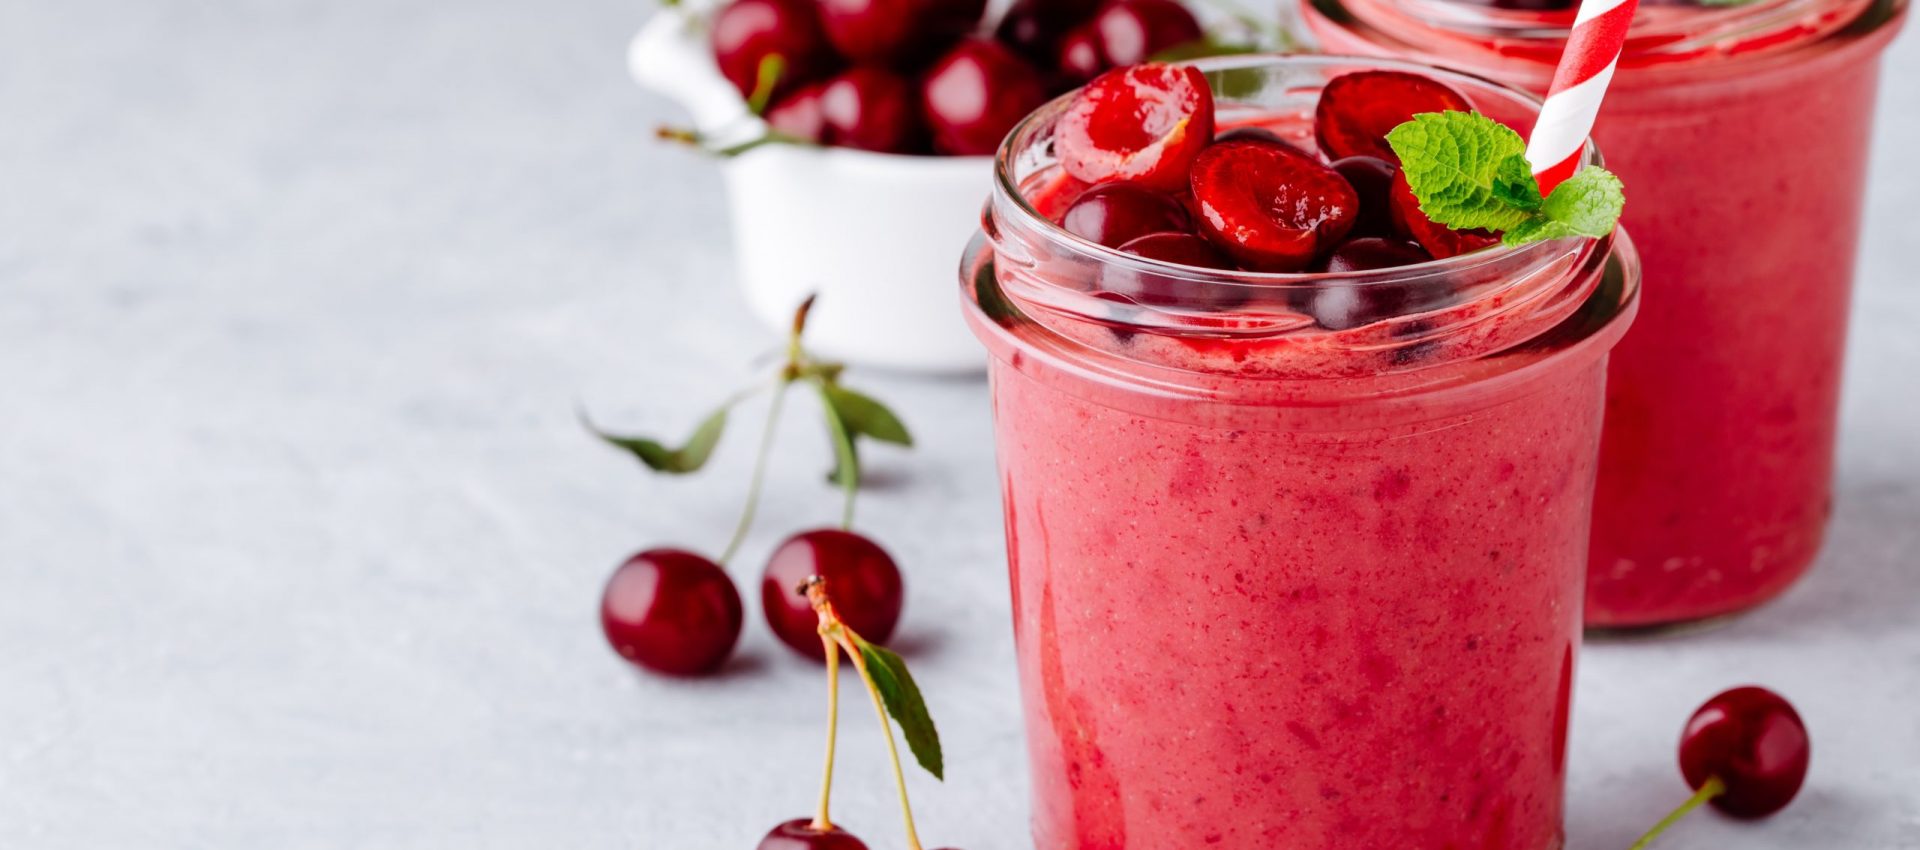 Cherry smoothie in glass with mint leaves and fresh berries